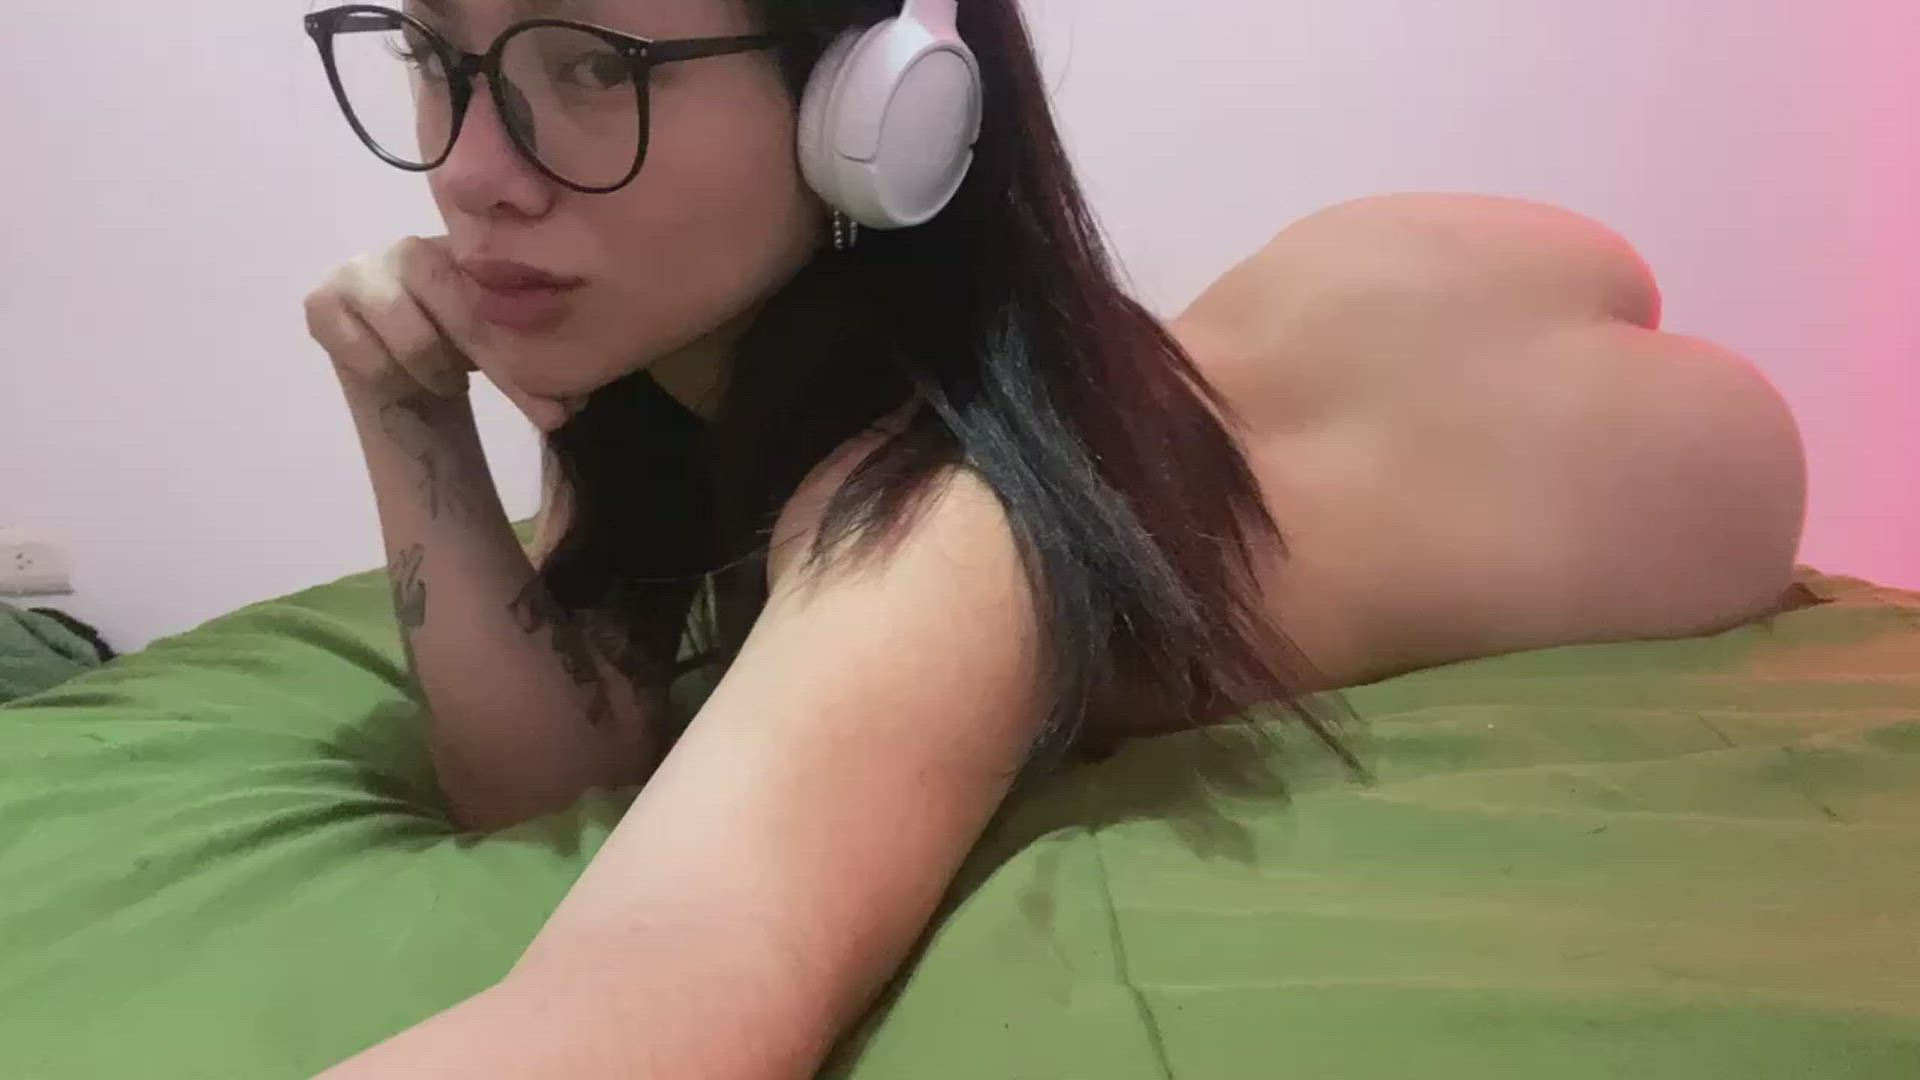 Ass porn video with onlyfans model prinsex777 <strong>@prinsex777</strong>